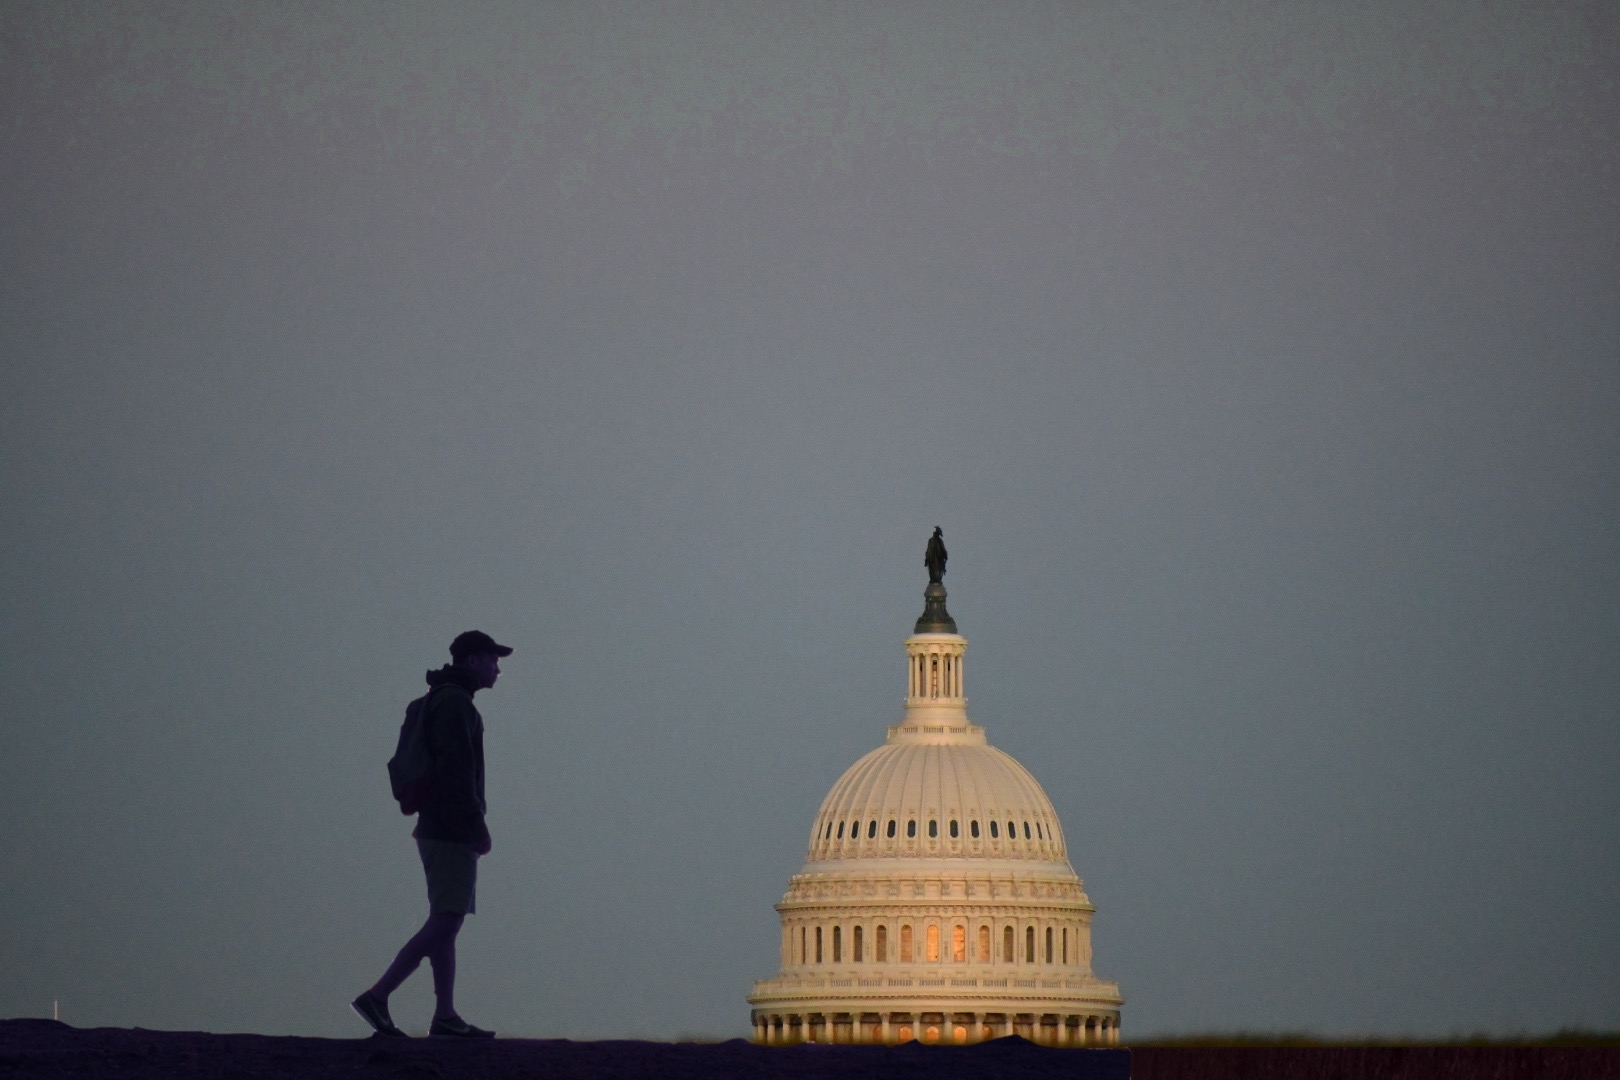 Photo of the dome of the capitol. Beside it, is the silhouette of a hiker.